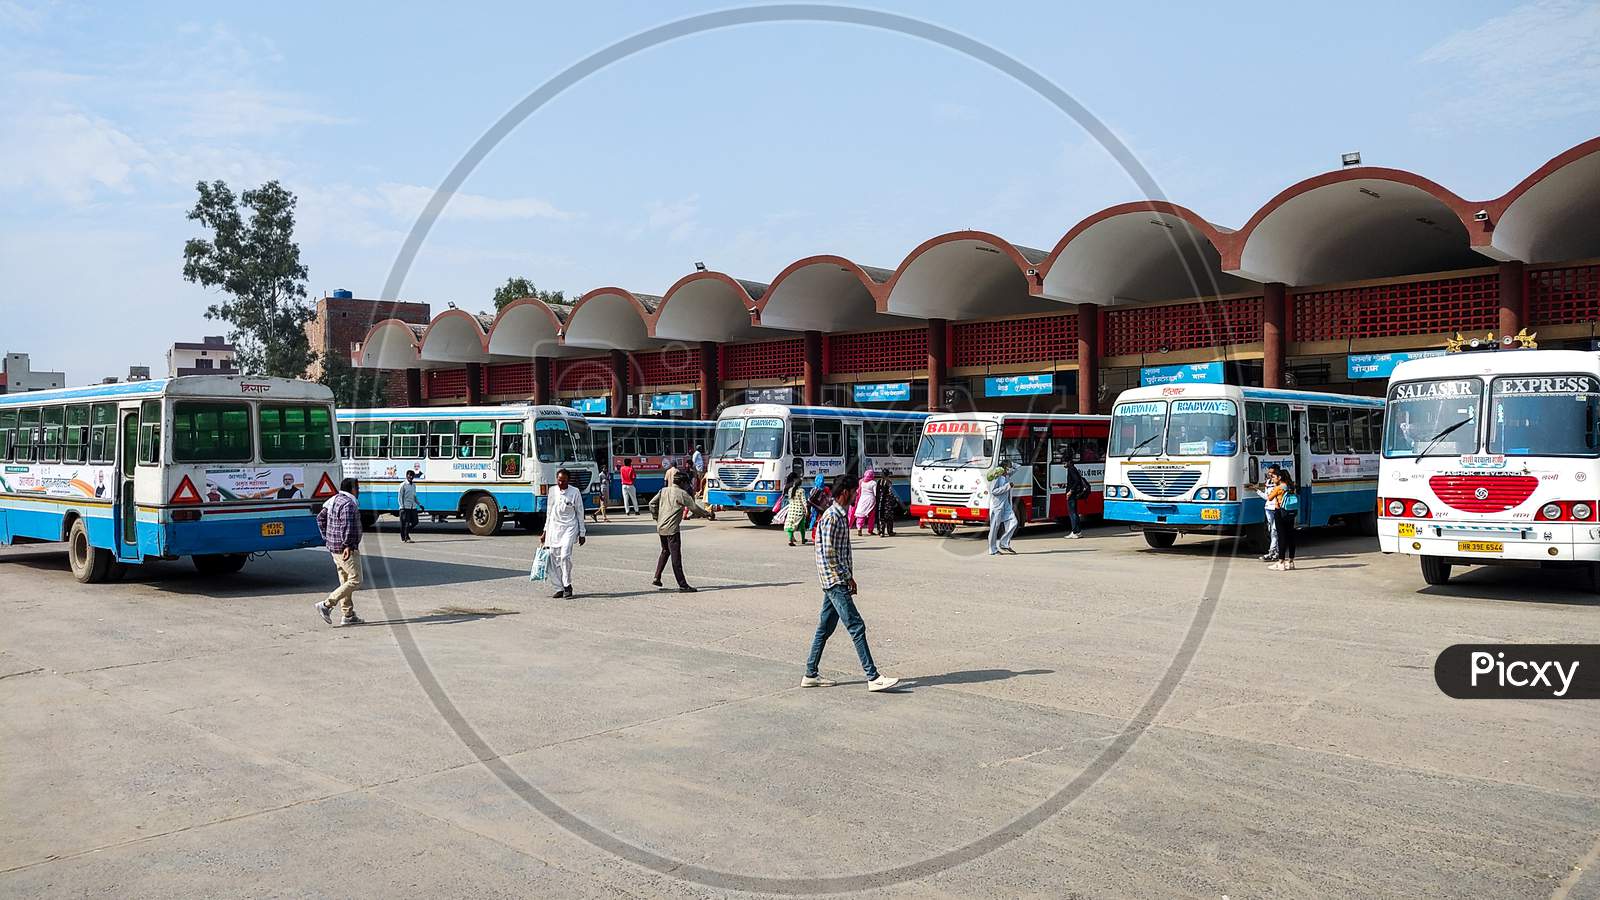 Haryana Roadways Buses Parked At The Bus Stand Of A City In Haryana